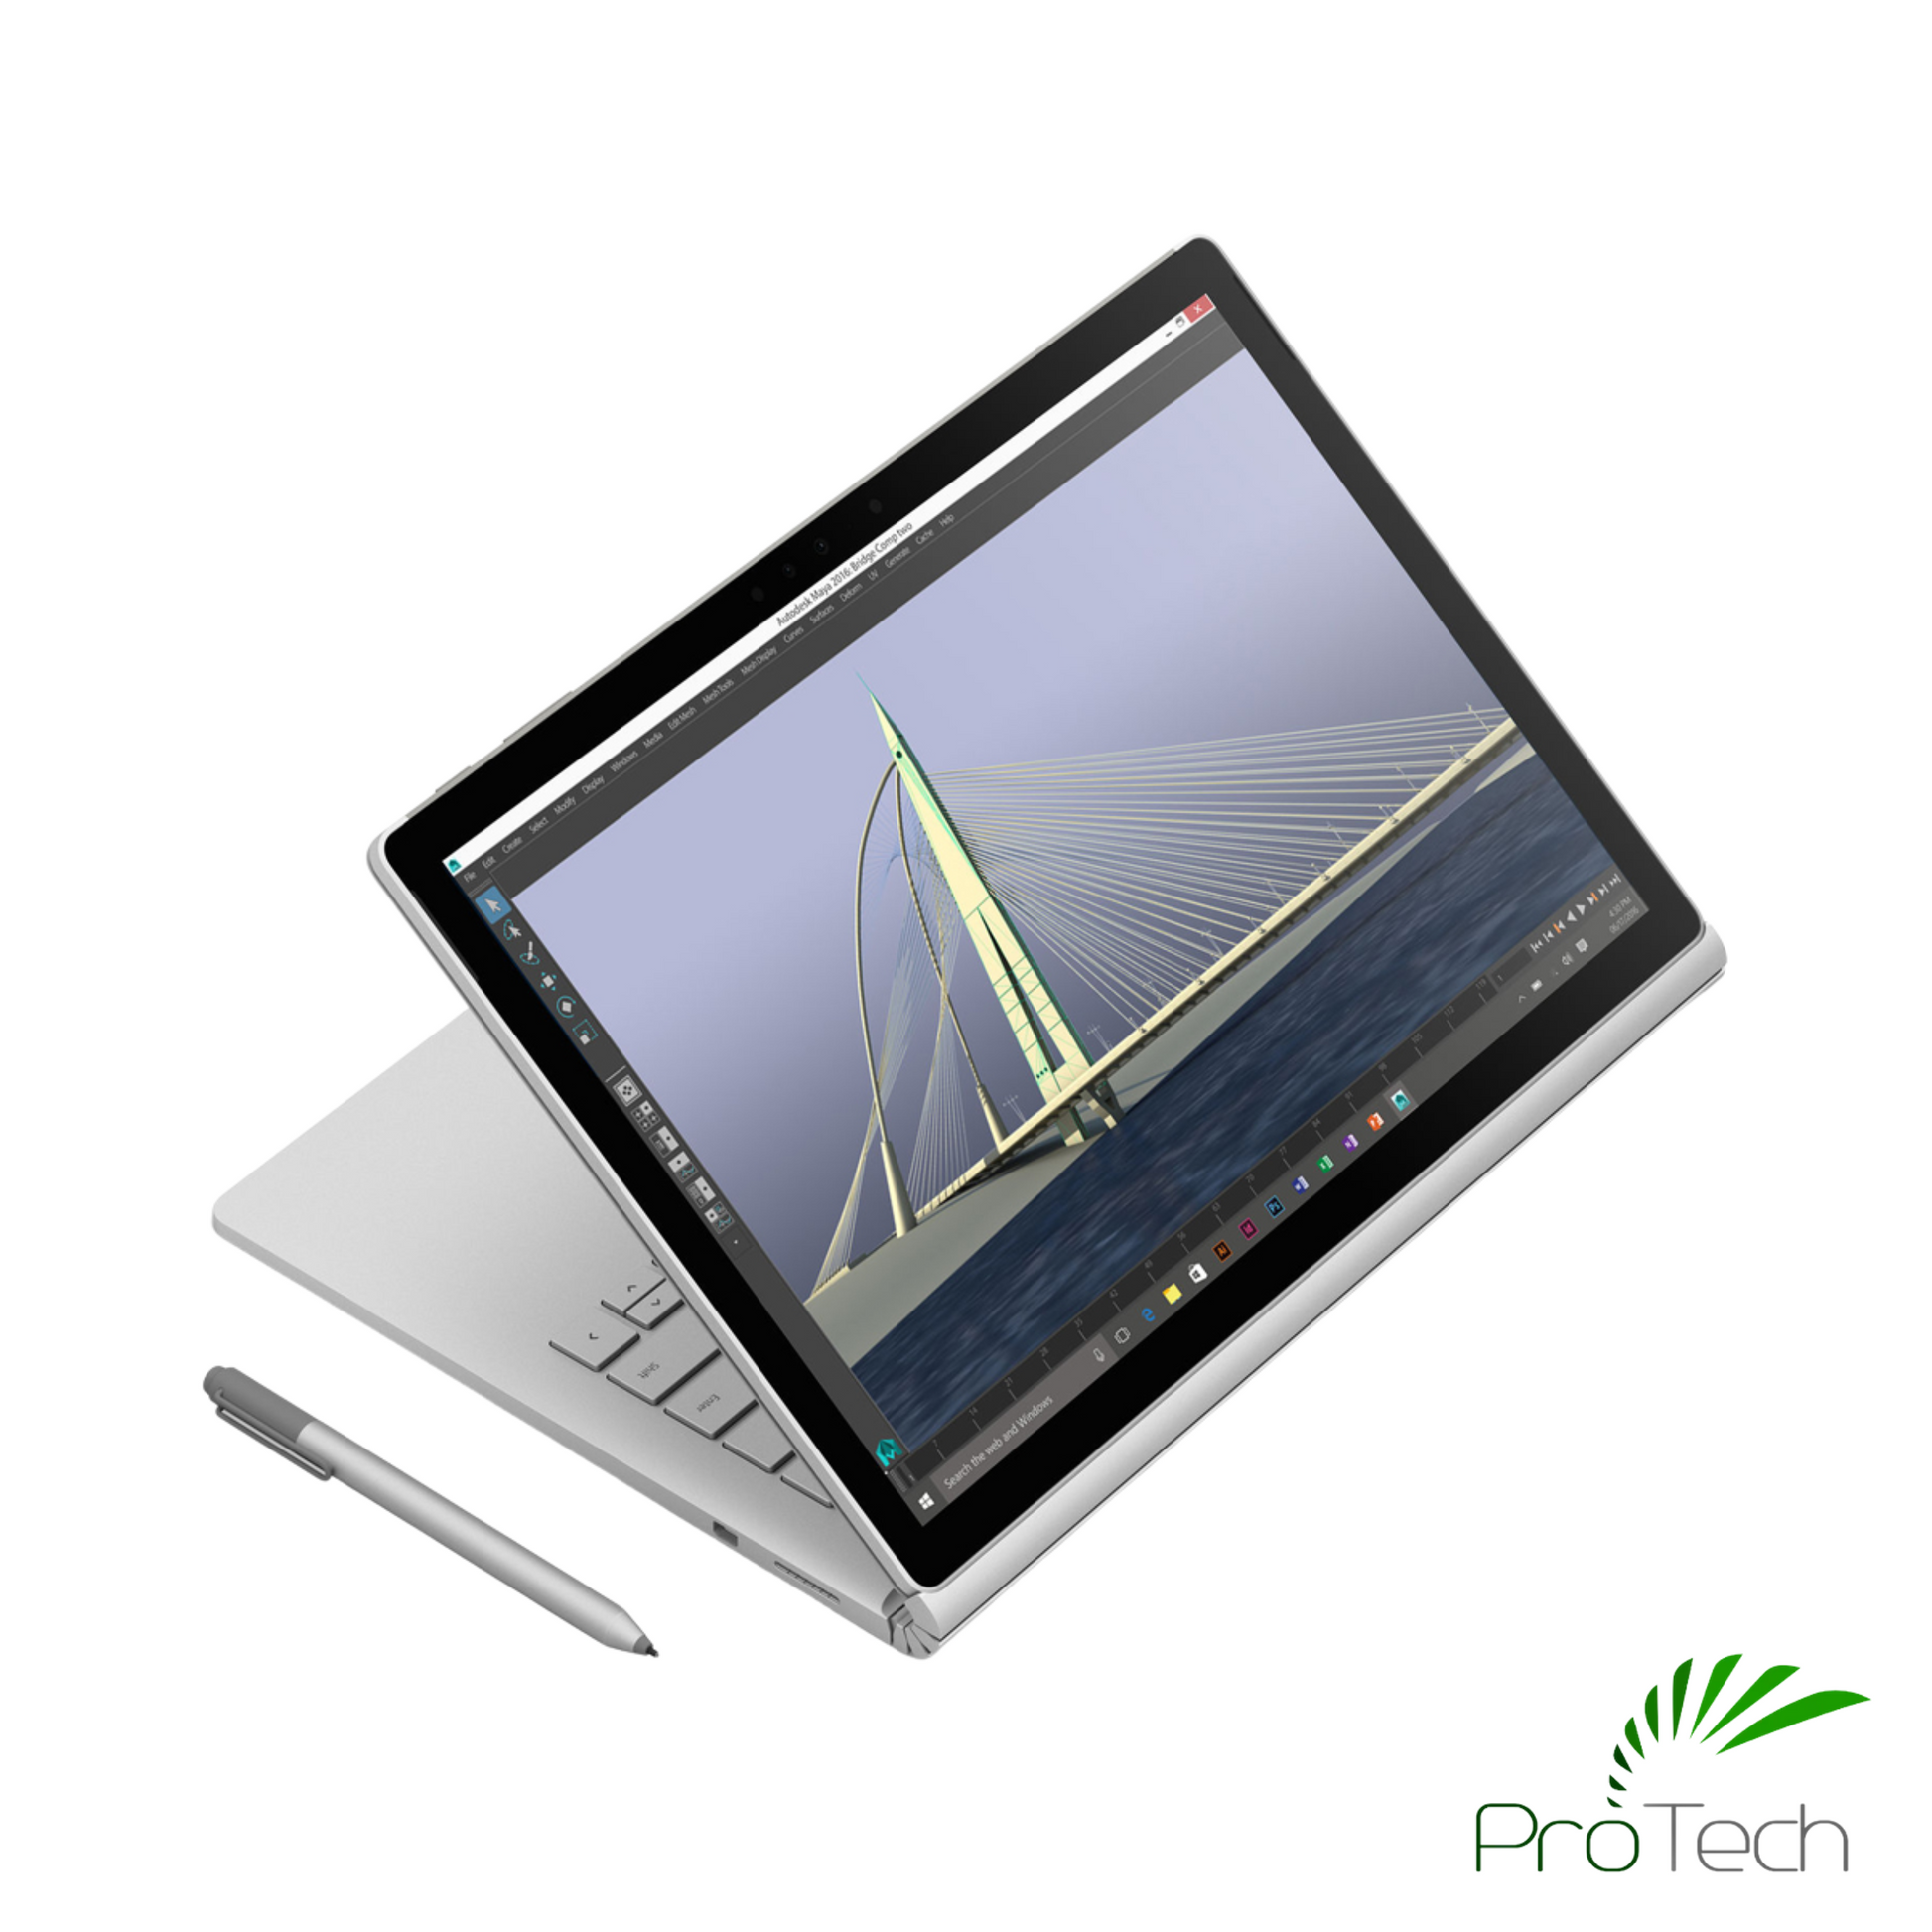 Microsoft Surface Book 2 13" | Core i5 | 8th Gen | 8GB RAM | 256GB SSD ProTech I.T. Solutions